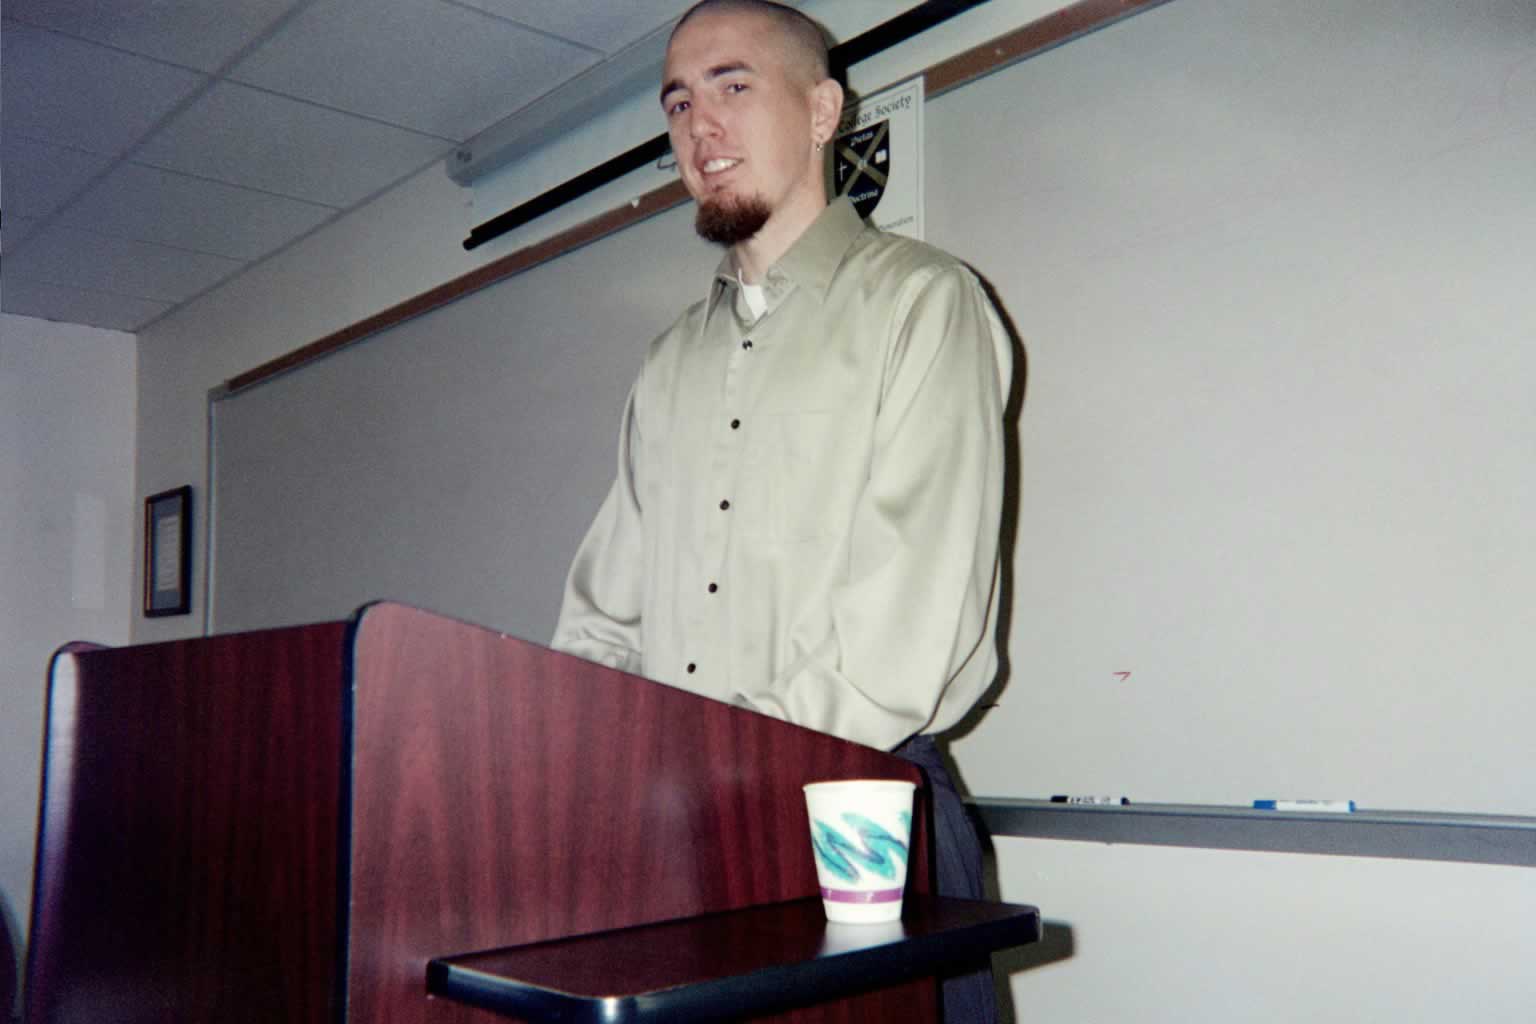 picture of a man standing behind a podium talking